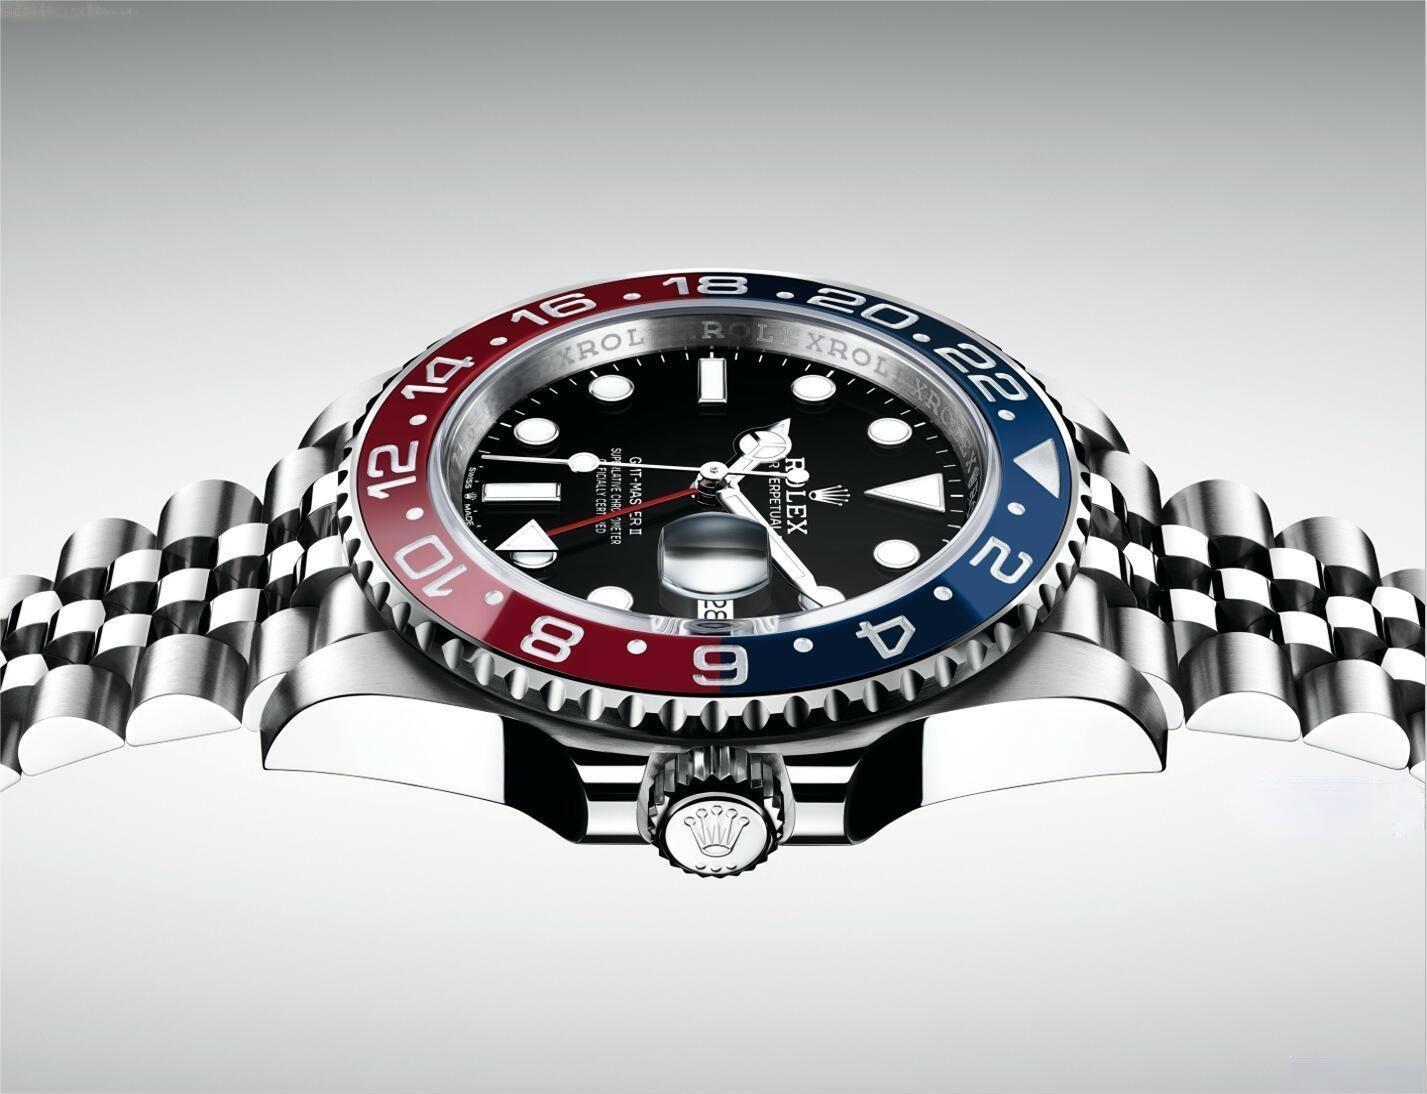 Indulge in the Exquisite Quality of Rolex Watches Without Breaking the Bank